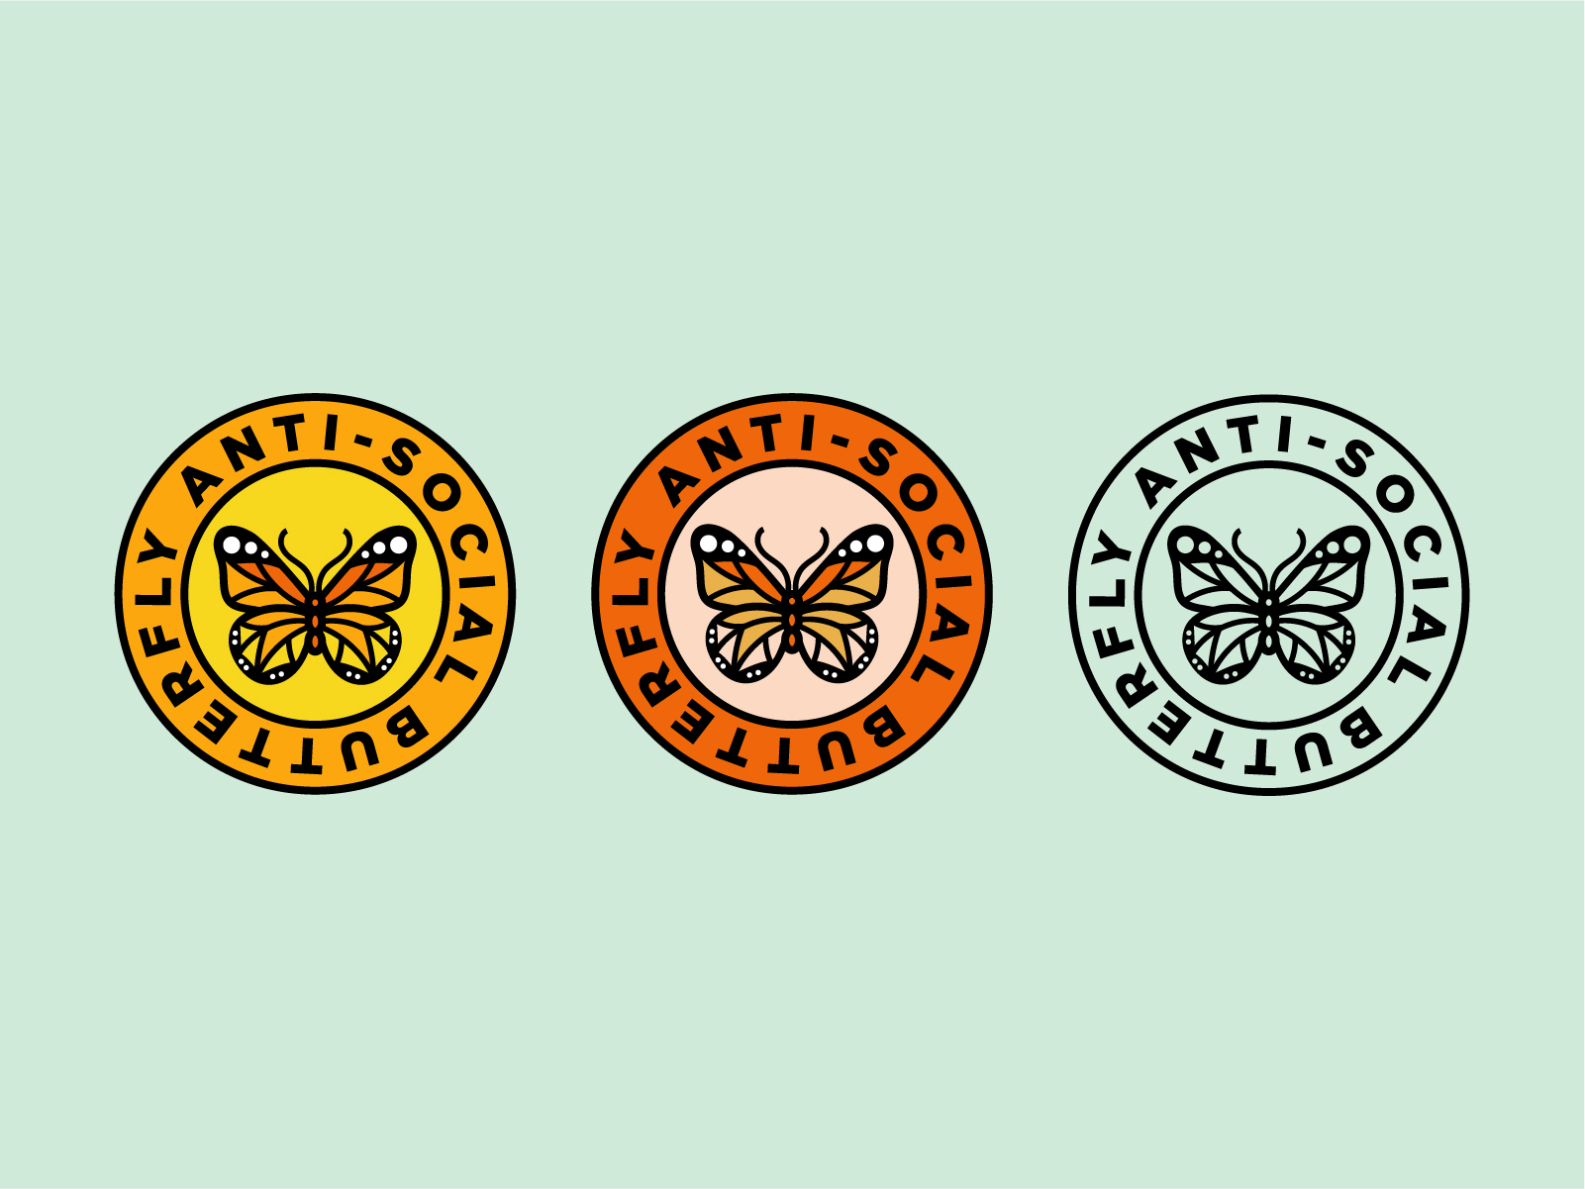 Download Anti-Social Butterfly by Aryn Landes on Dribbble